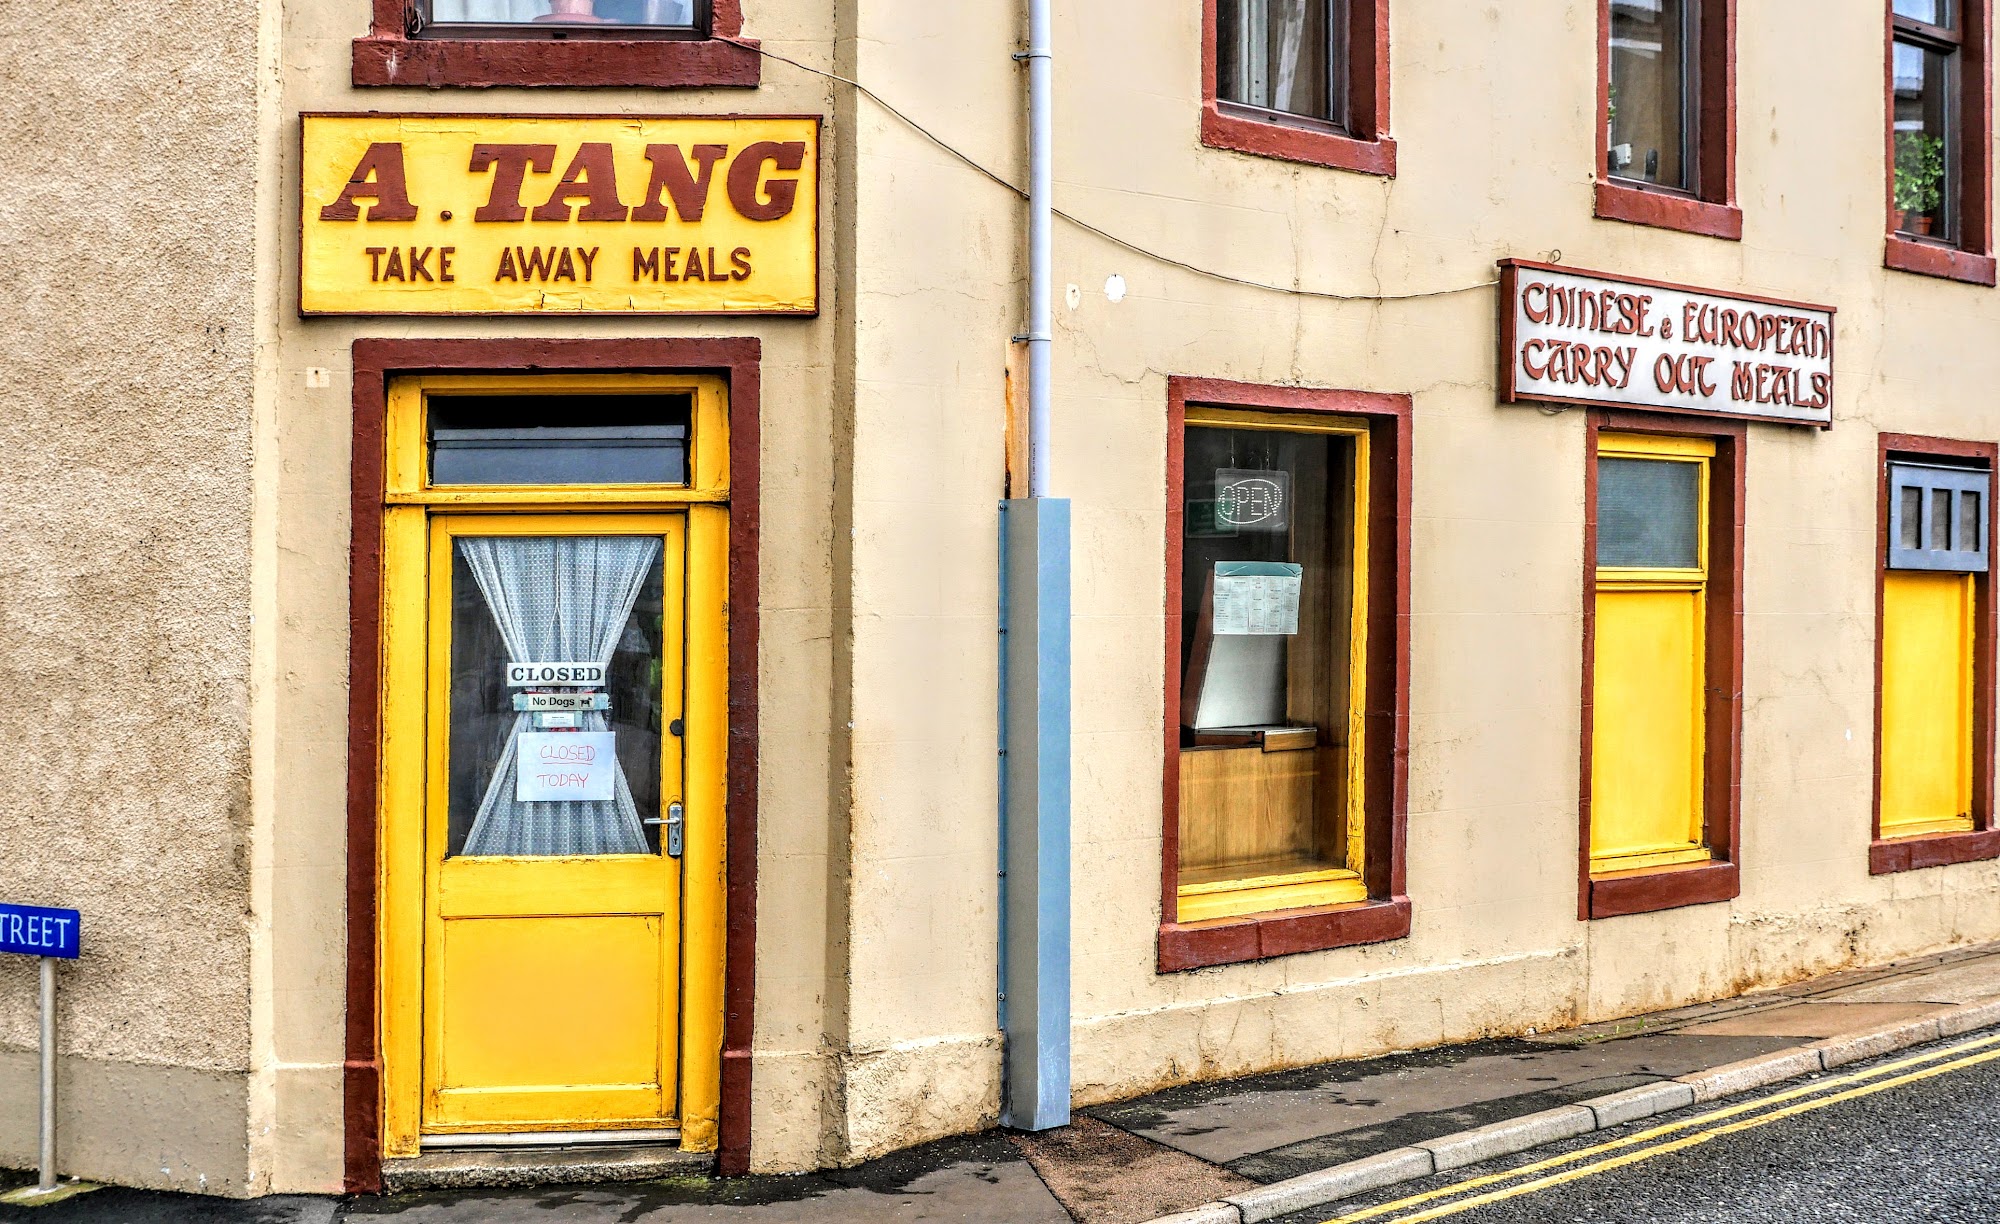 A Tang Chinese & European Carry Out Meals